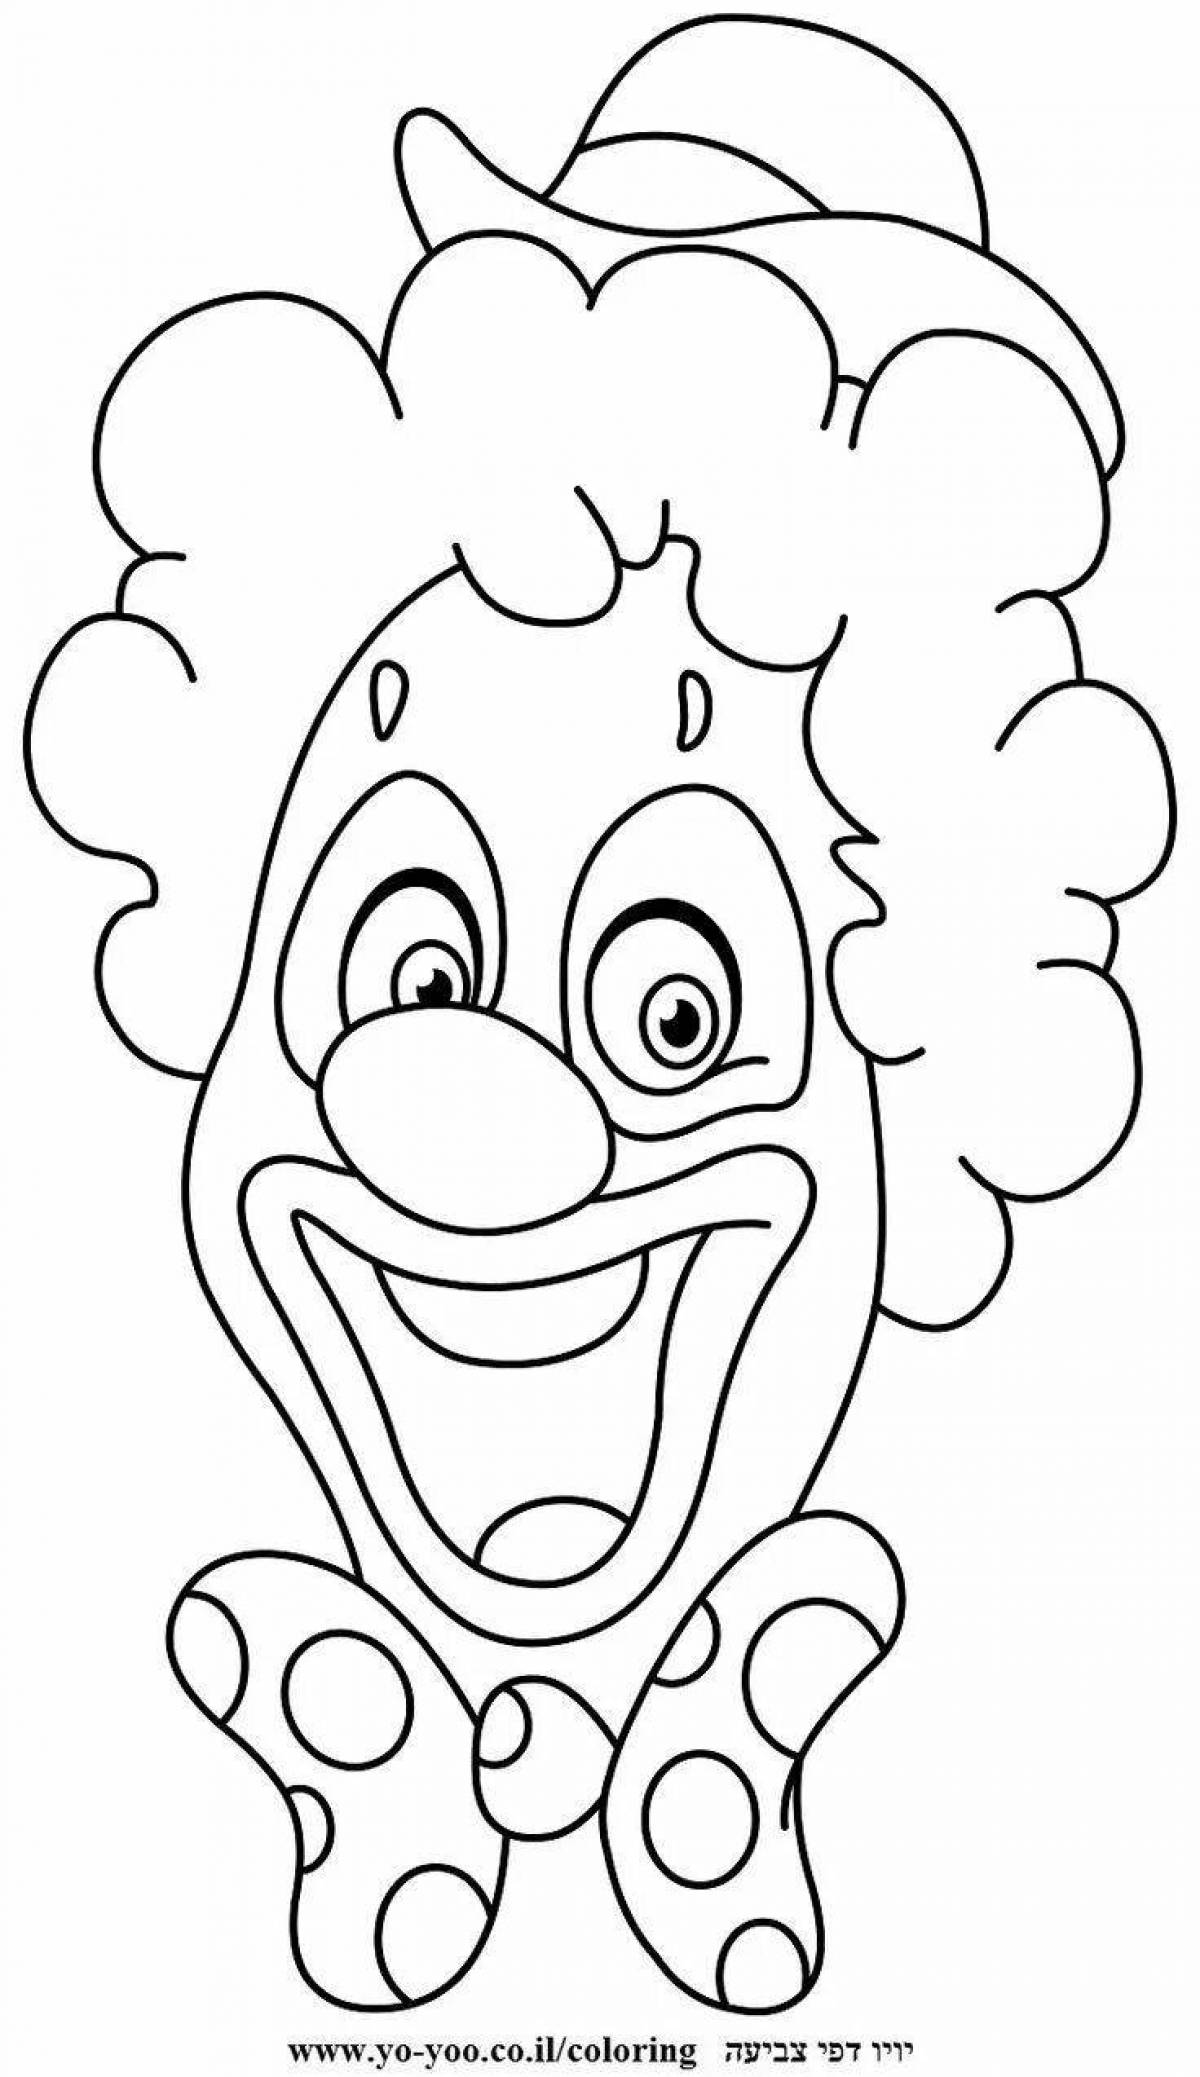 Colorful dazzling clown head coloring page